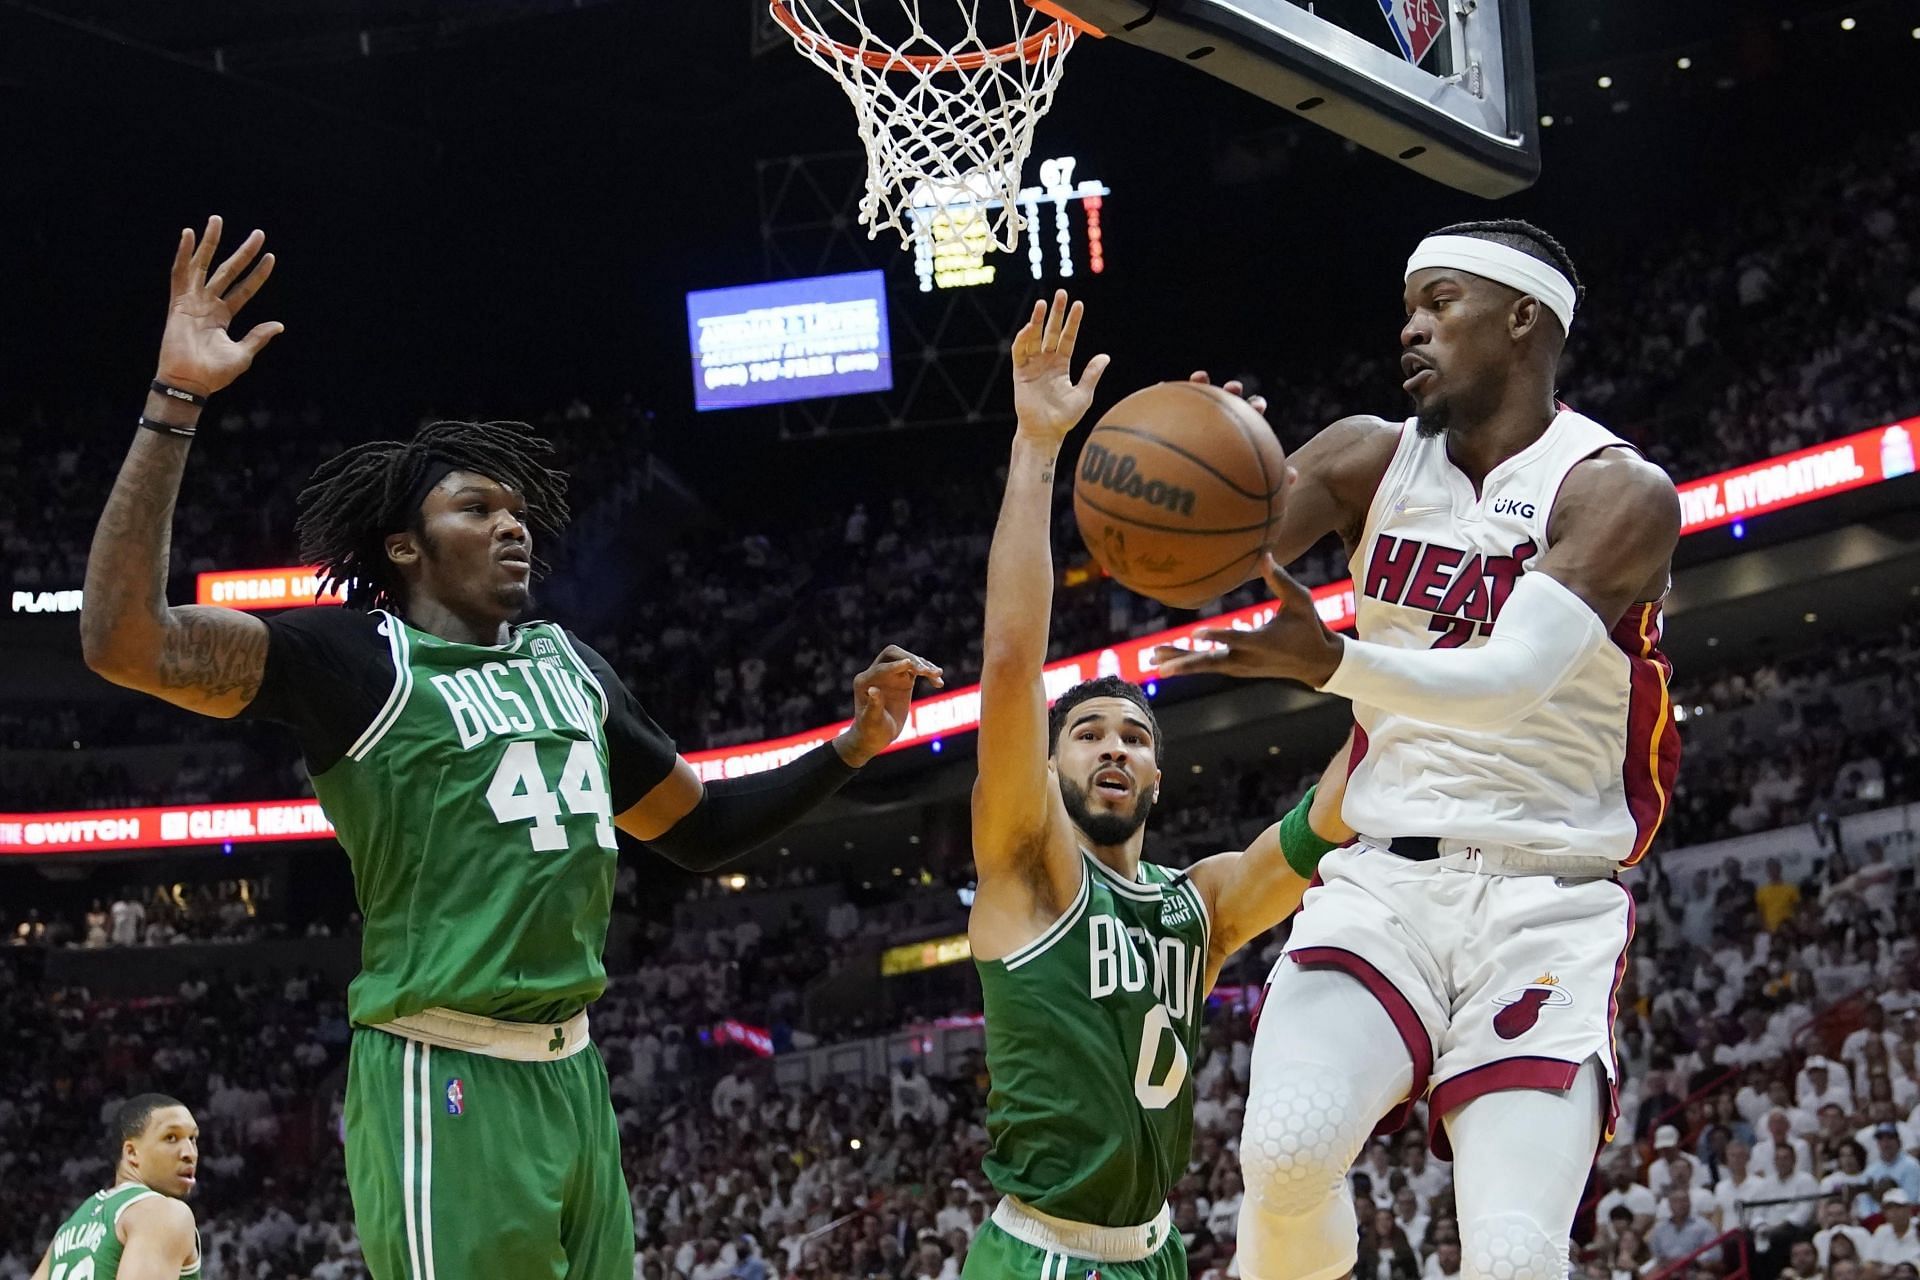 The Boston Celtics defense clamped down on Jimmy Butler and the Miami Heat to tie the Eastern Conference finals. [Photo: MassLive.com]